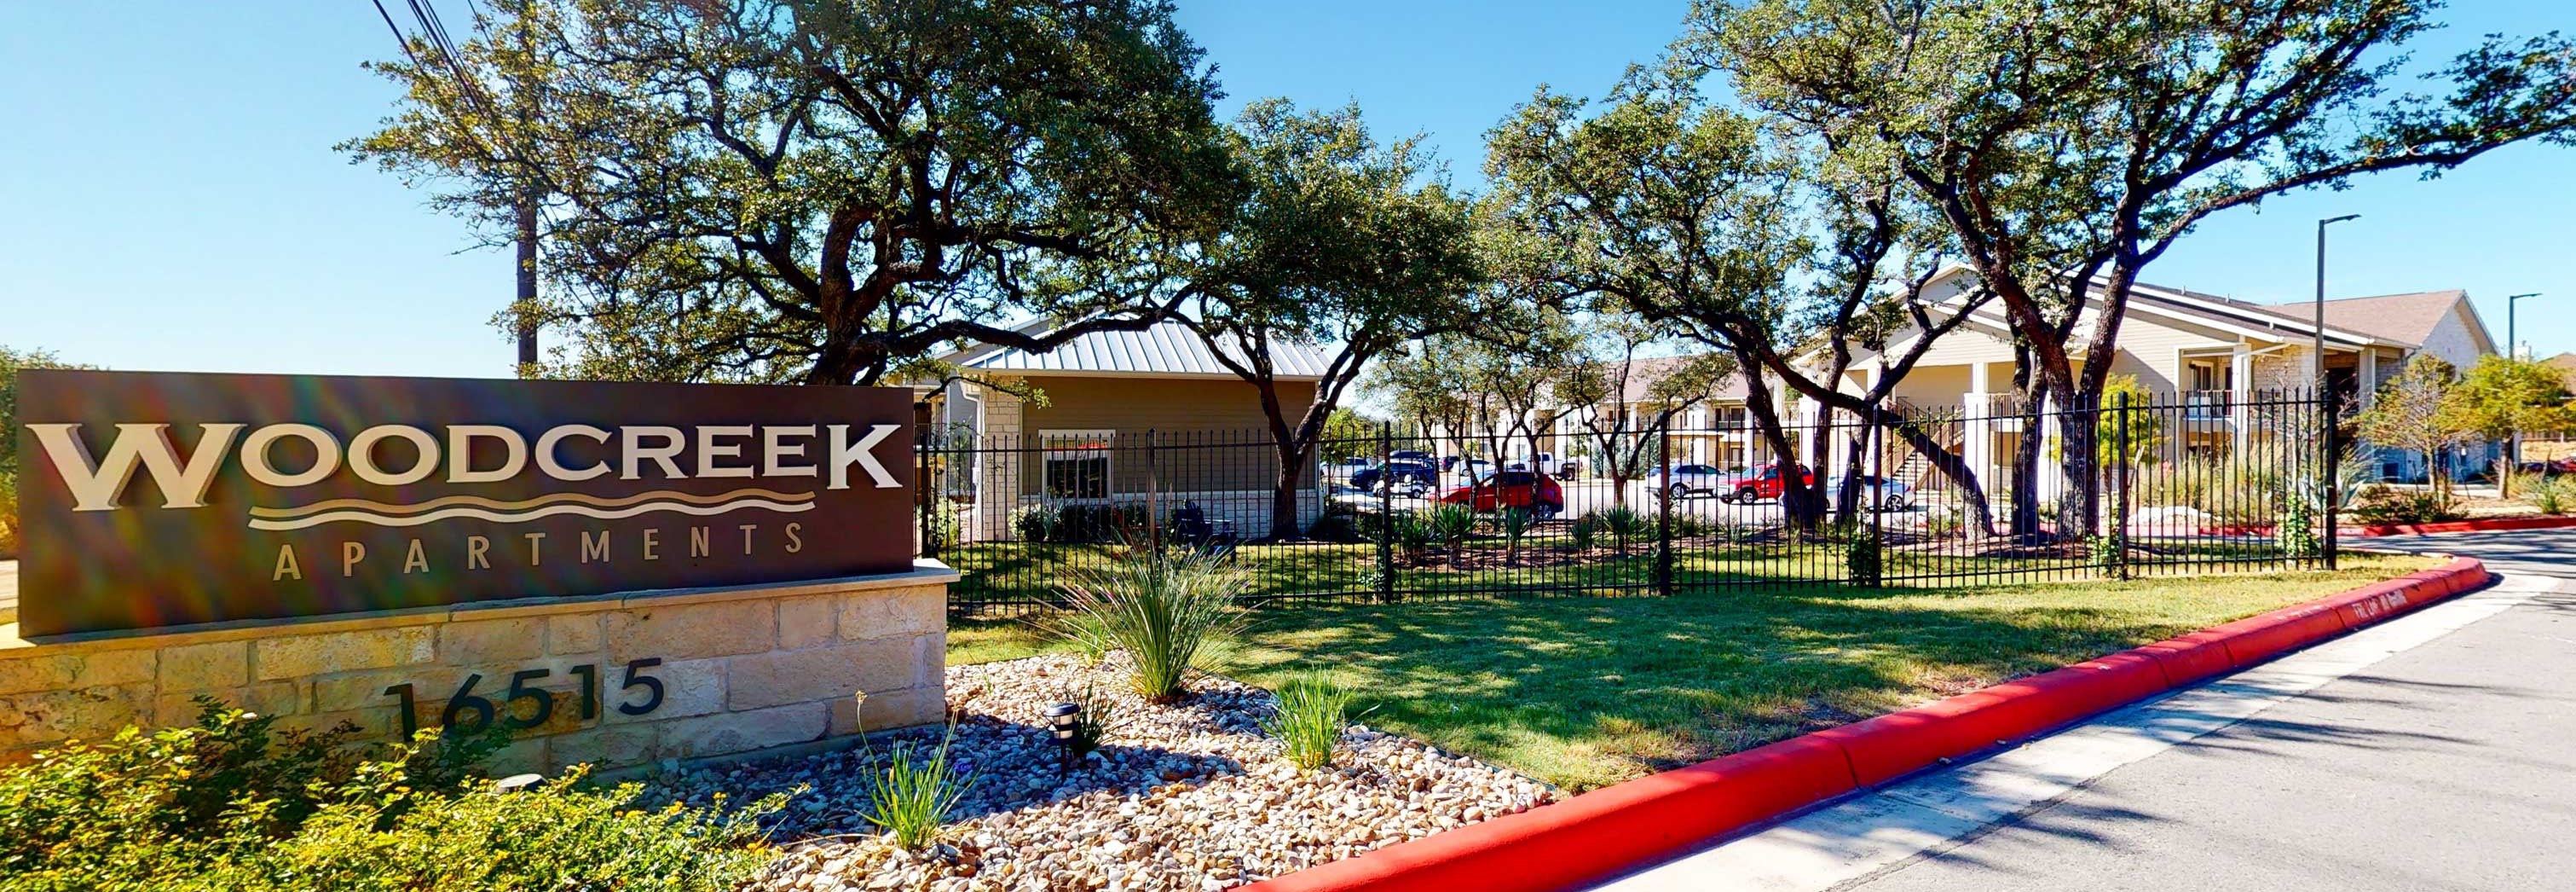 Welcome to Woodcreek Apartments in Wimberley, TX